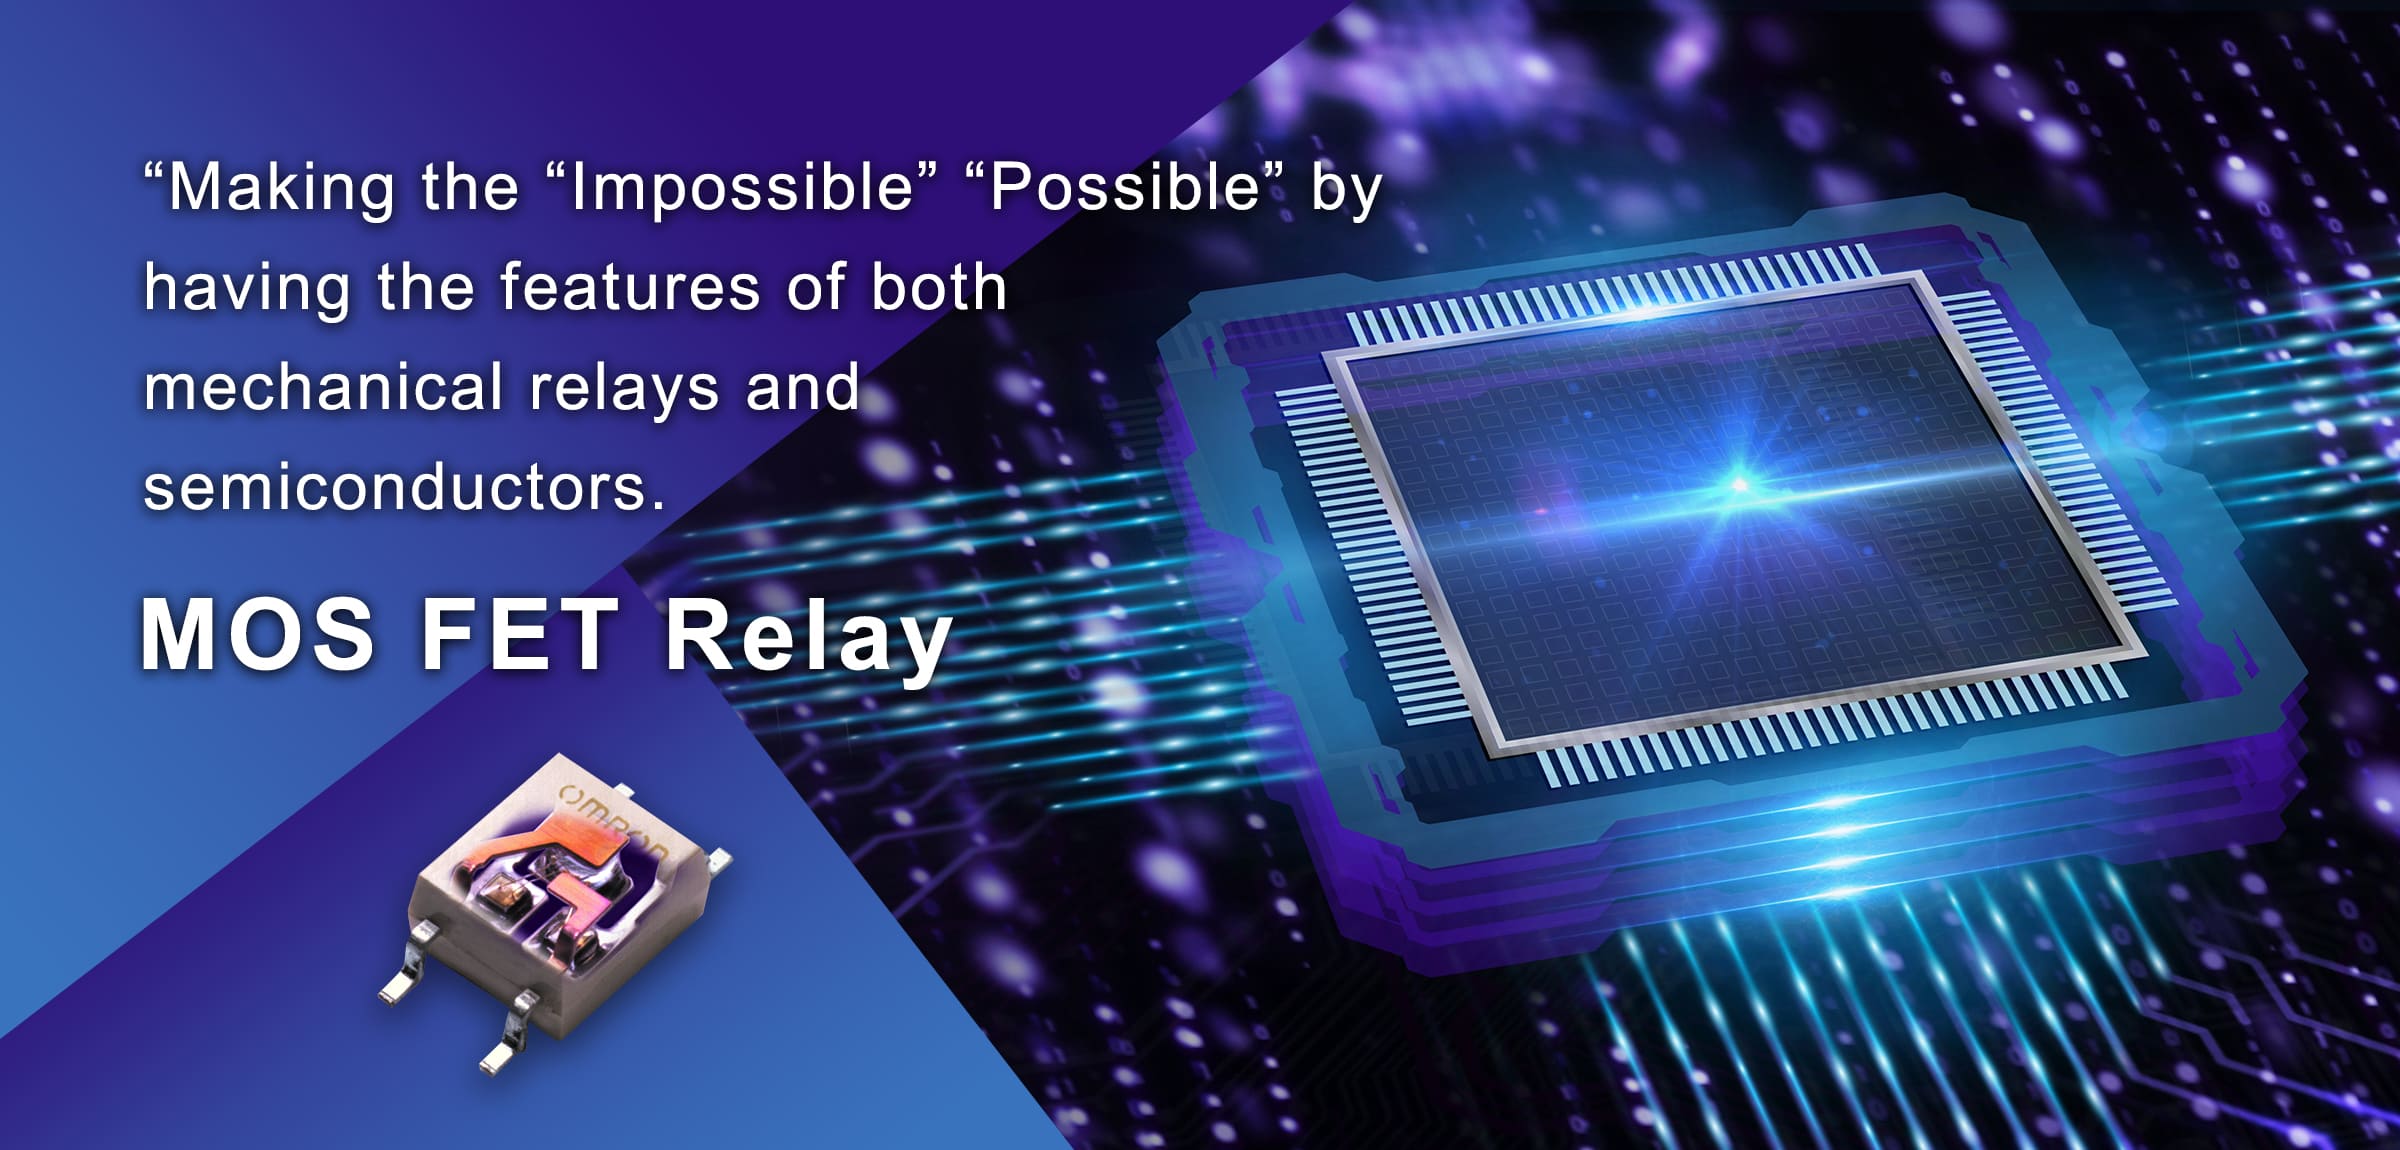 MOS FET Relay “Making the “Impossible” “Possible” by having the features of both mechanical relays and semiconductors.